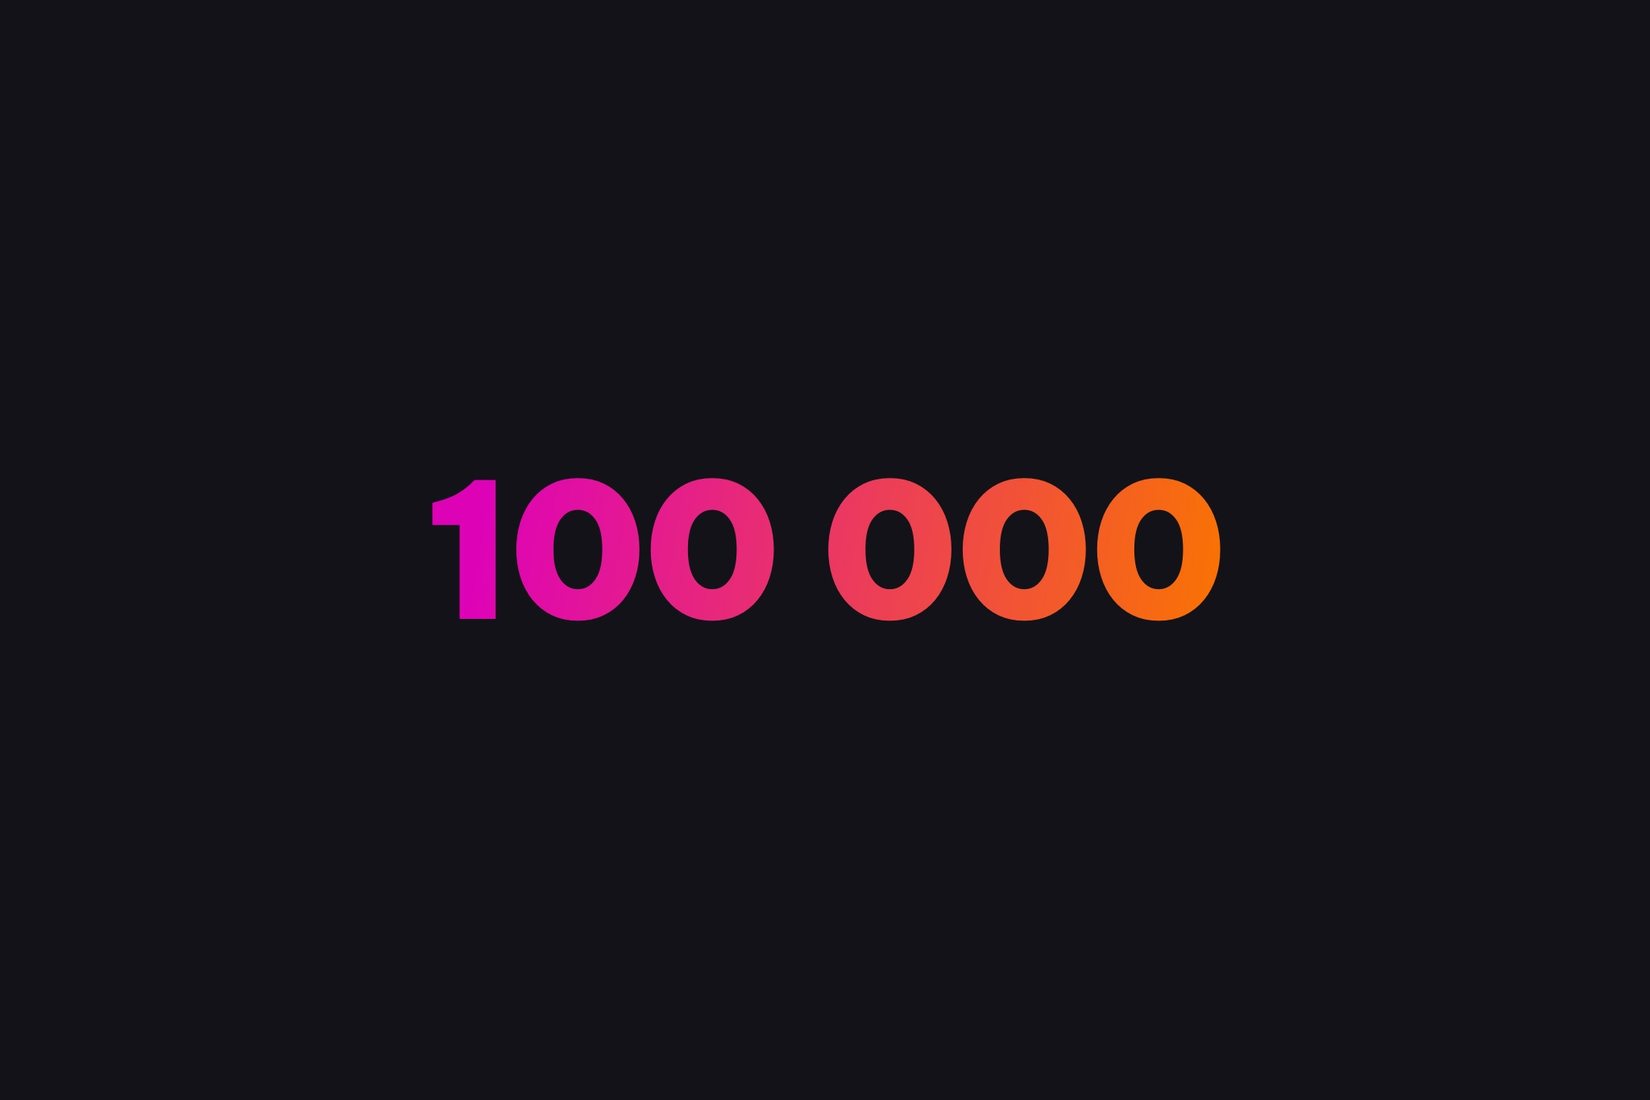 We are 100.000